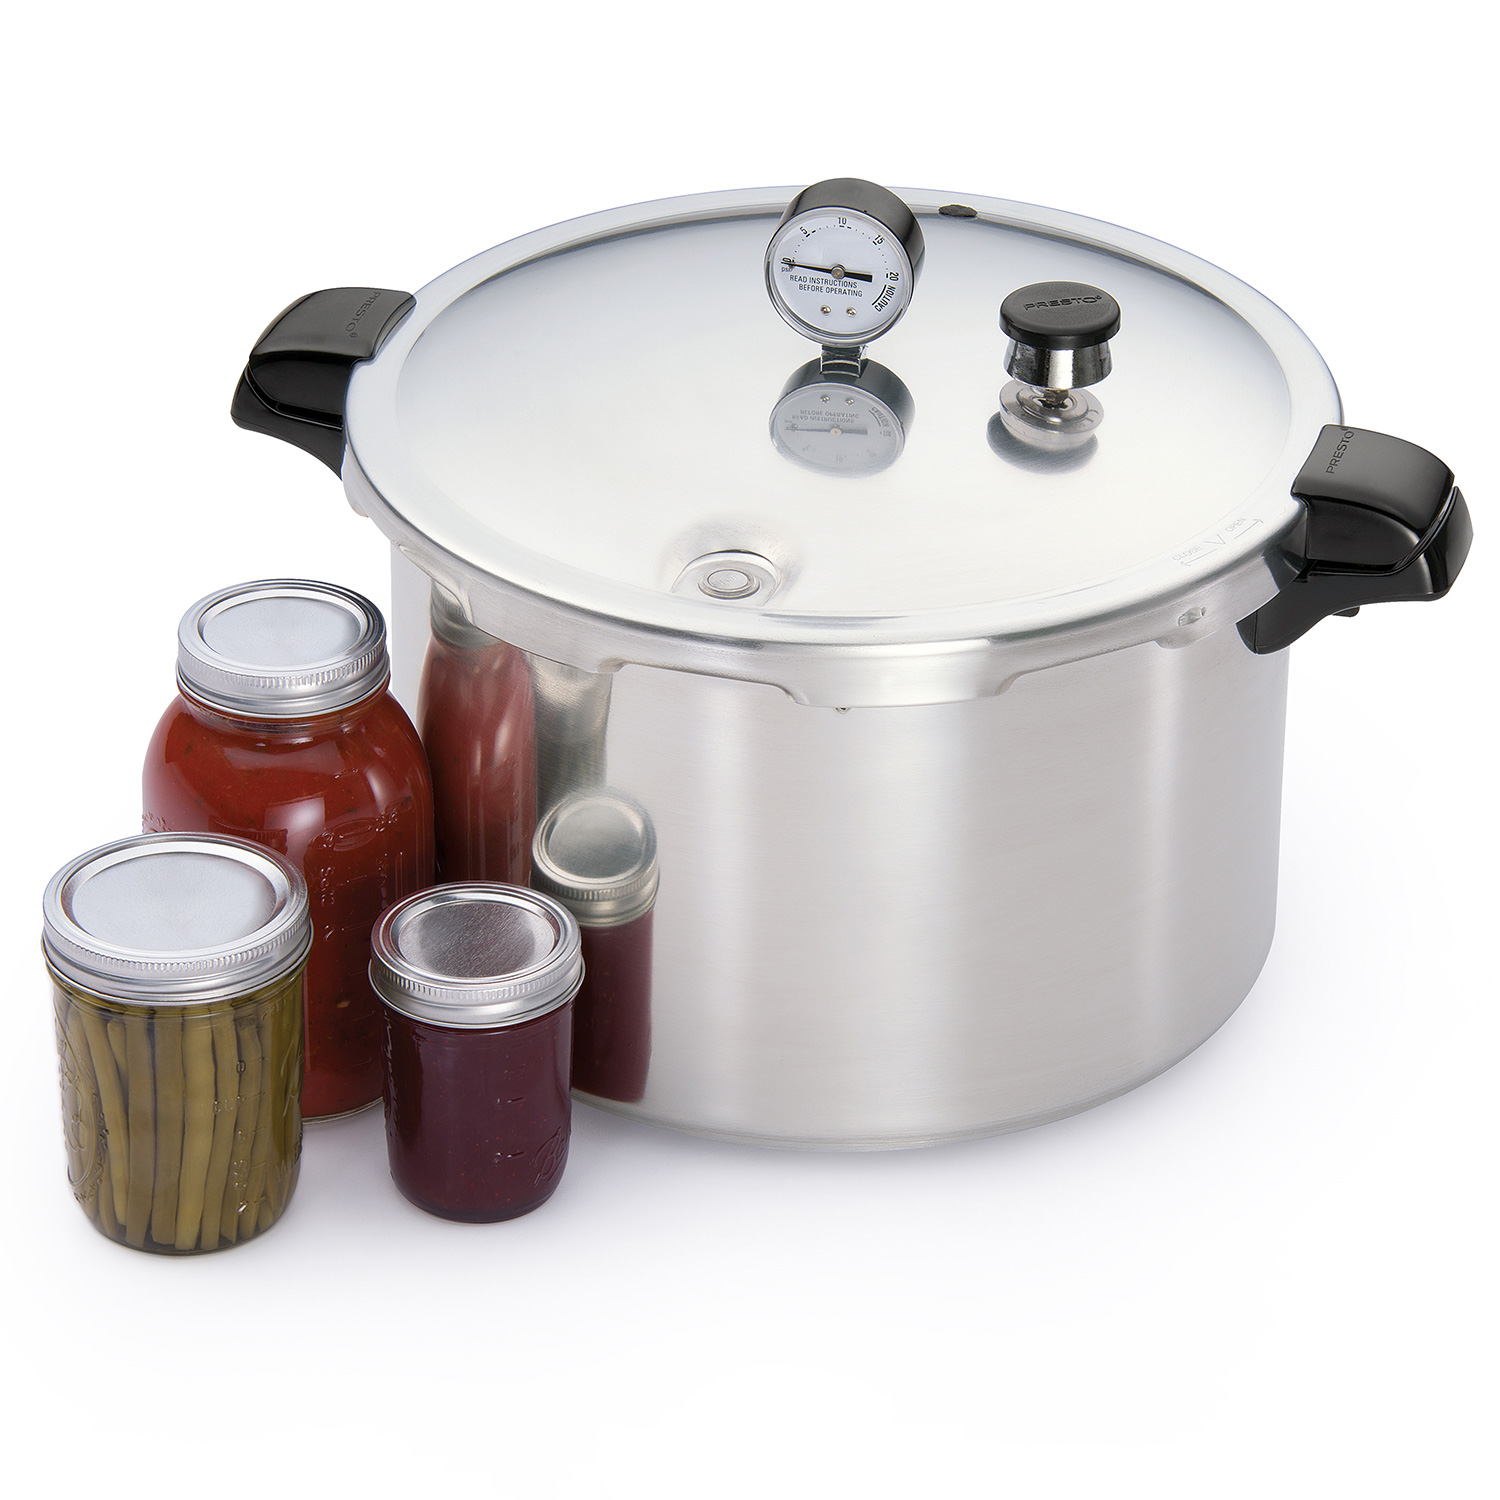 16 Quart Pressure Canner And Cooker Canners Presto,Chinese American Chop Suey Recipe